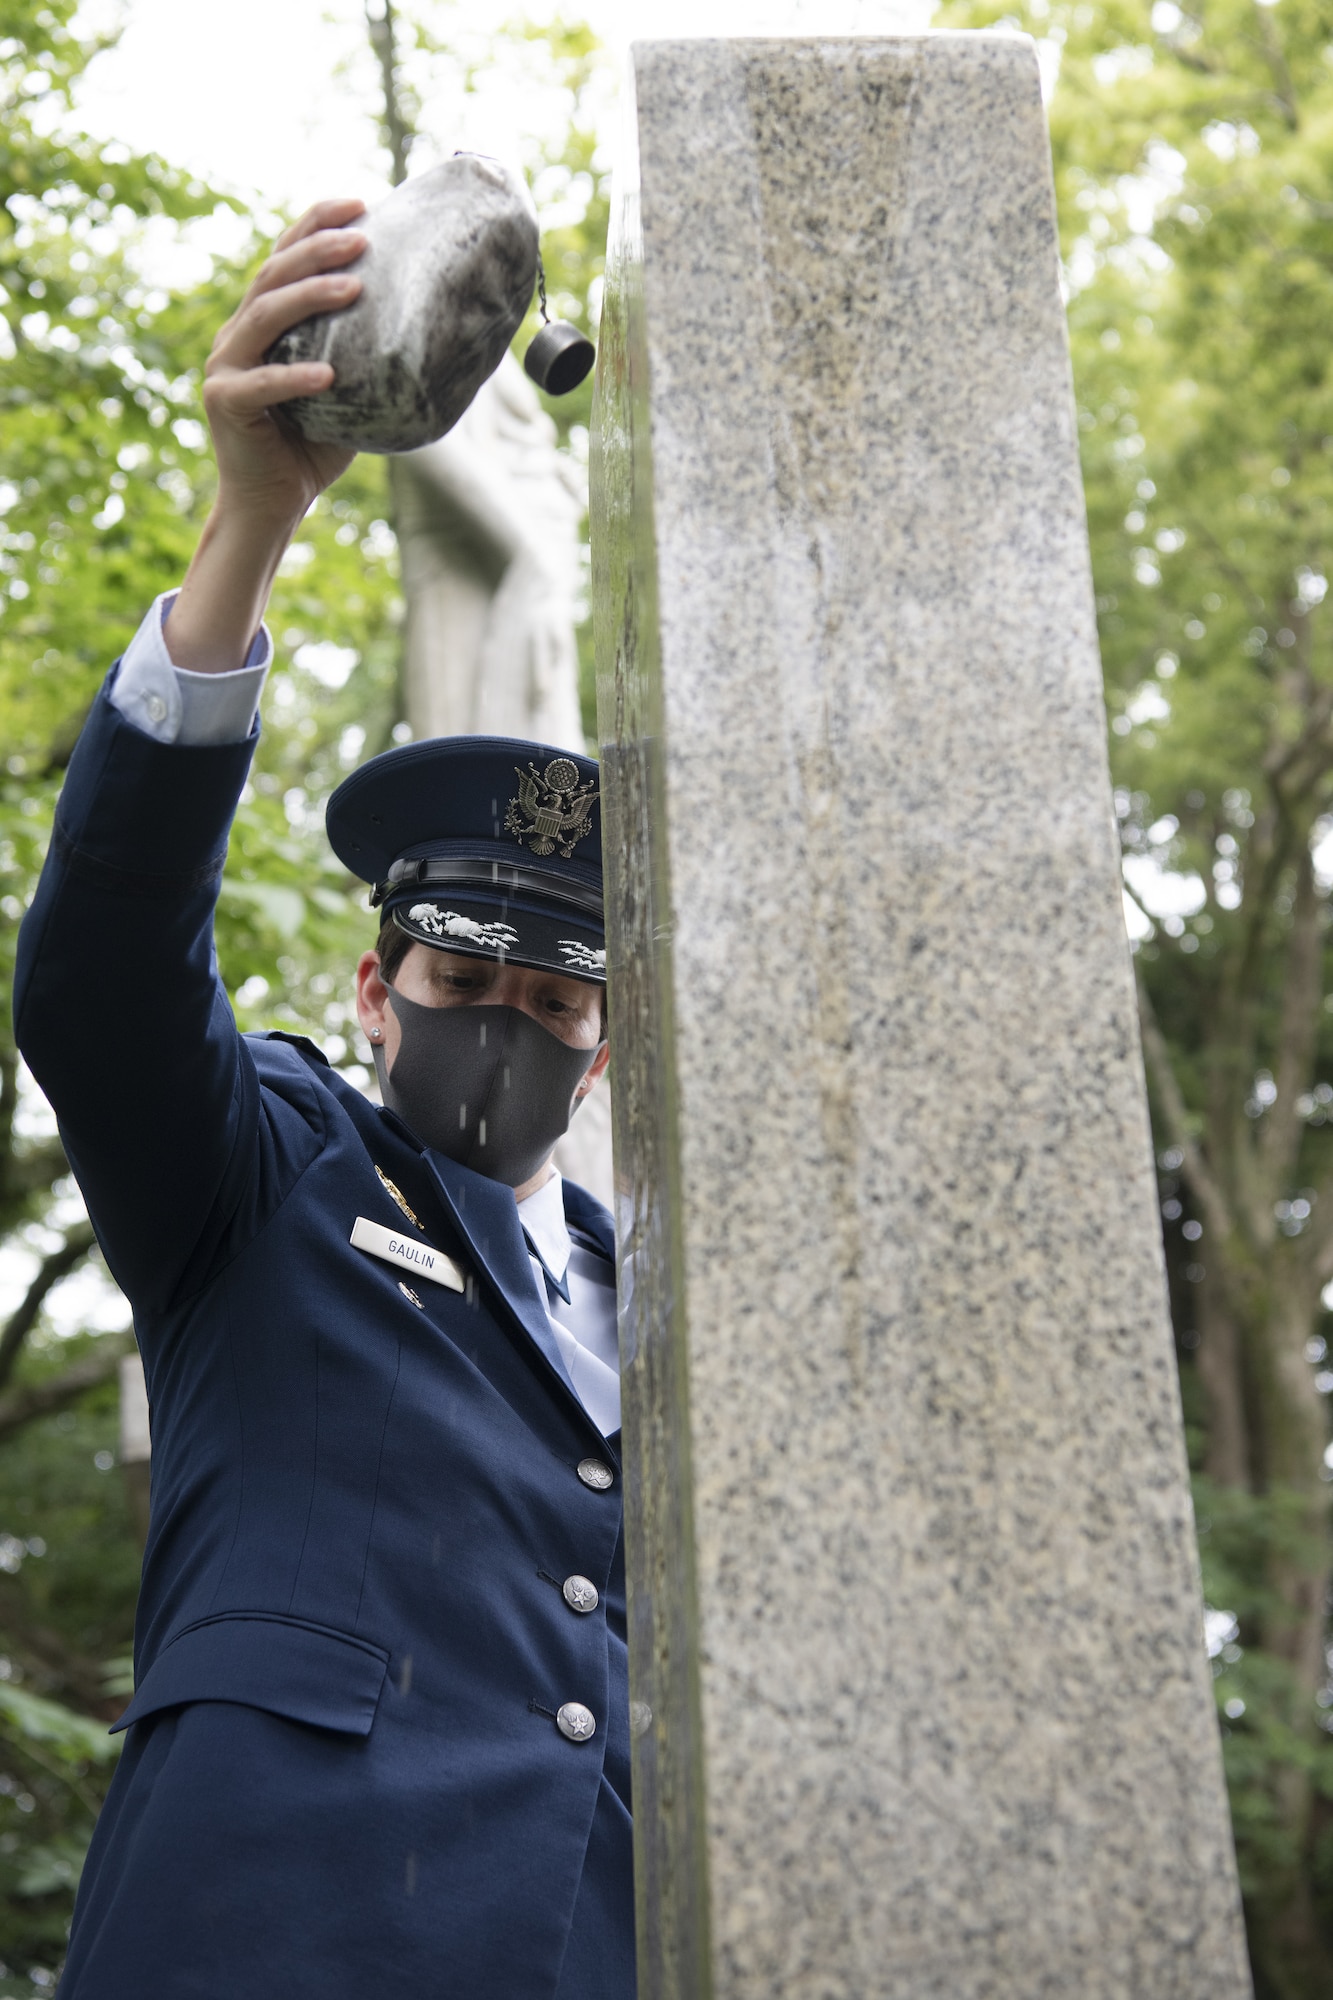 U.S. Air Force Col. Julie Gaulin, 374th Airlift Wing vice commander, pours bourbon over a B-29 Monument as a tradition to honor the fallen during a U.S.-Japan Joint Memorial Service June 11, 2022, at Mt. Shizuhata in Shizuoka city, Japan. The memorial service provided participants the opportunity to honor those who lost their lives during a World War II air raid on June 20, 1945. During the raid, two U.S. Army Air Forces B-29 Superfortresses collided mid-air over Shizuoka City, resulting in the death of 23 Airmen on board the aircraft. Representatives of the U.S. Air Force’s Yokota Air Base, Japan Self Defense Force, and Shizuoka City rendered their respects to the Airmen and Japanese civilians who lost their lives as a result of the tragedy, and reflected on the strong alliance the U.S. and Japan have forged since the end of World War II. (U.S. Air Force photo by Tech. Sgt. Christopher Hubenthal)